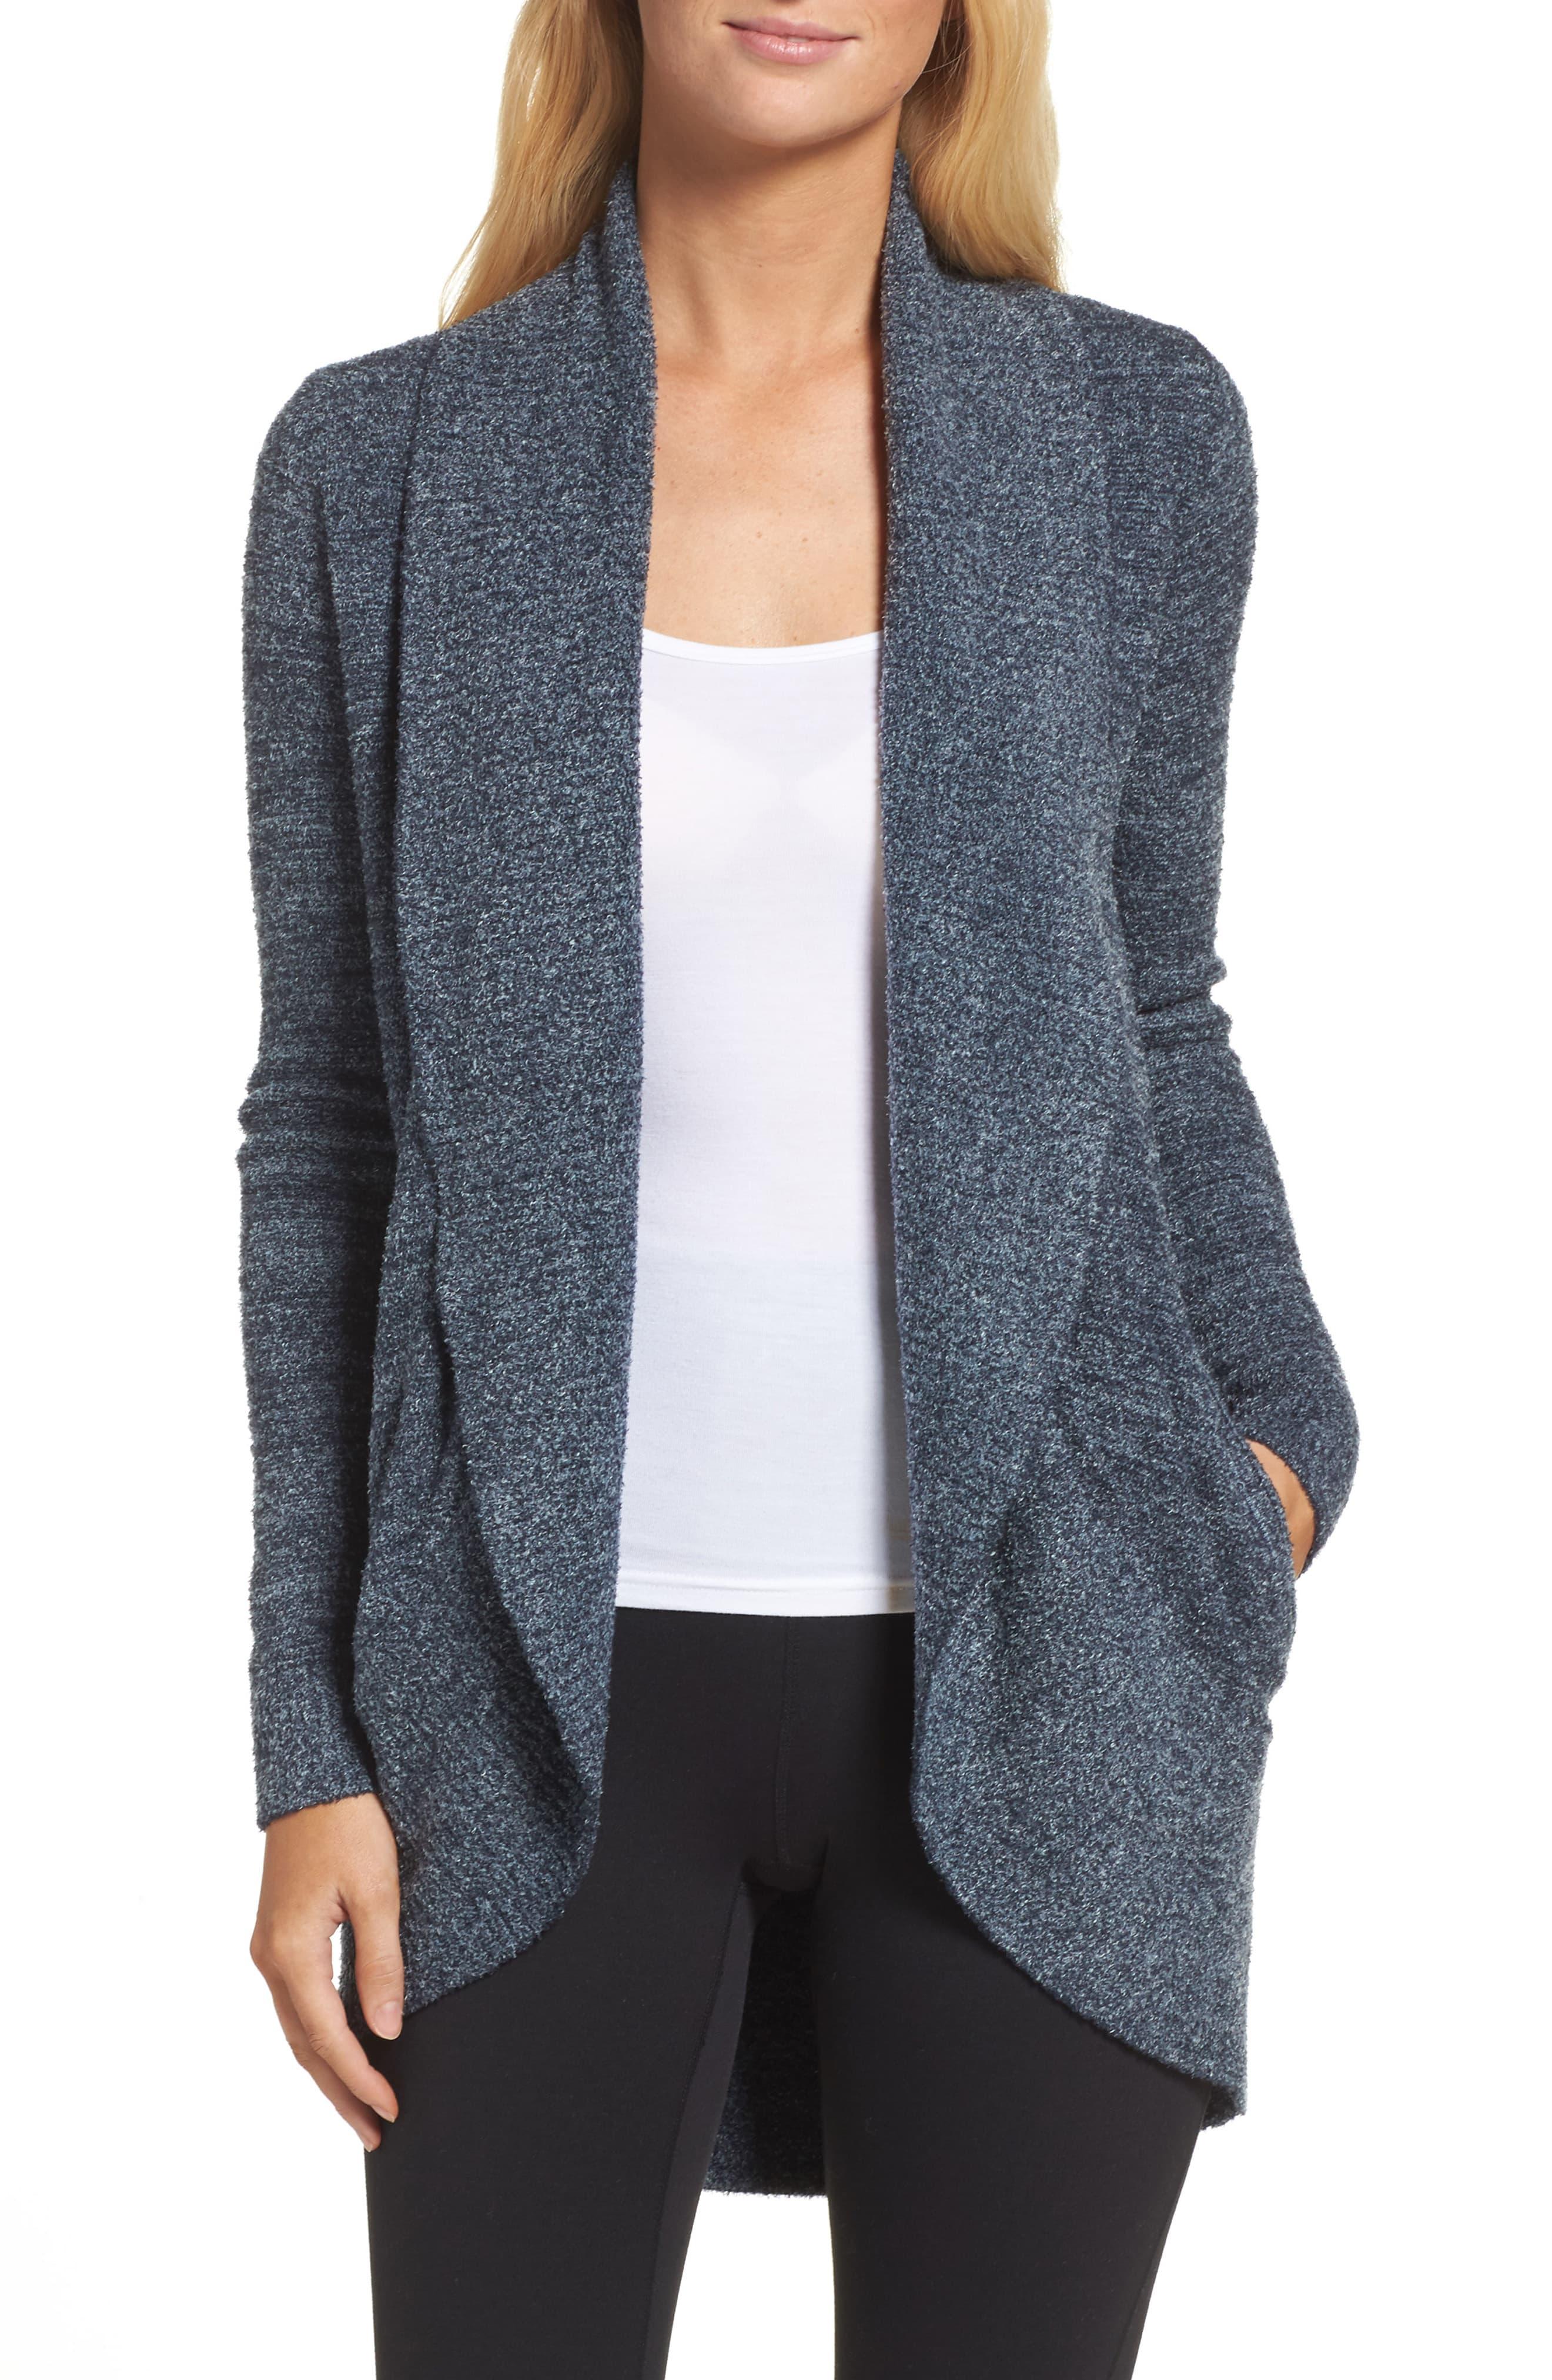 Barefoot Dreams Barefoot Dreams Cozychictm Lite Circle Cardigan in Blue ...